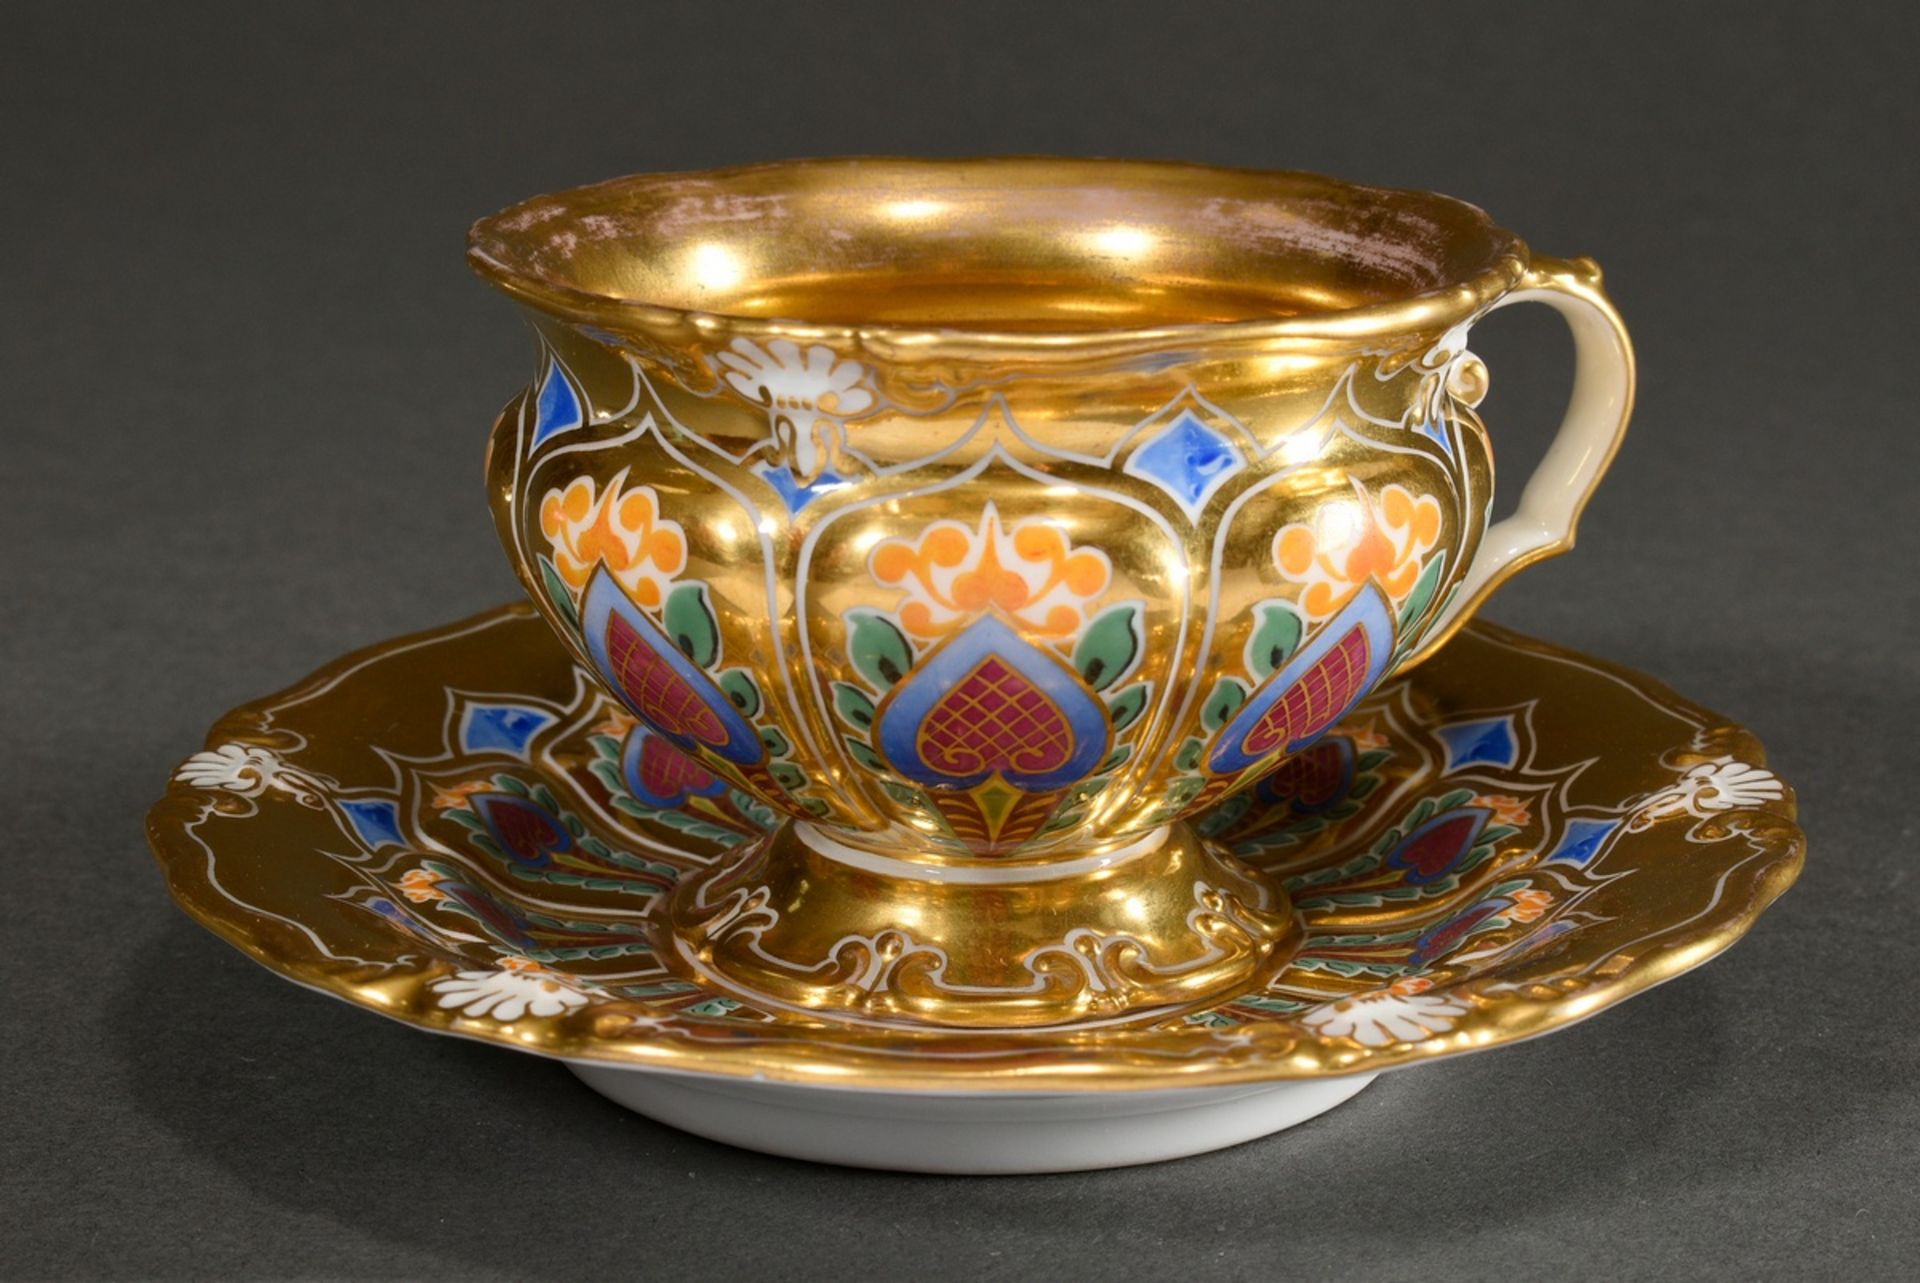 Biedermeier KPM cup with humped wall and strong coloured ornaments on gold ground in fine painting  - Image 2 of 4